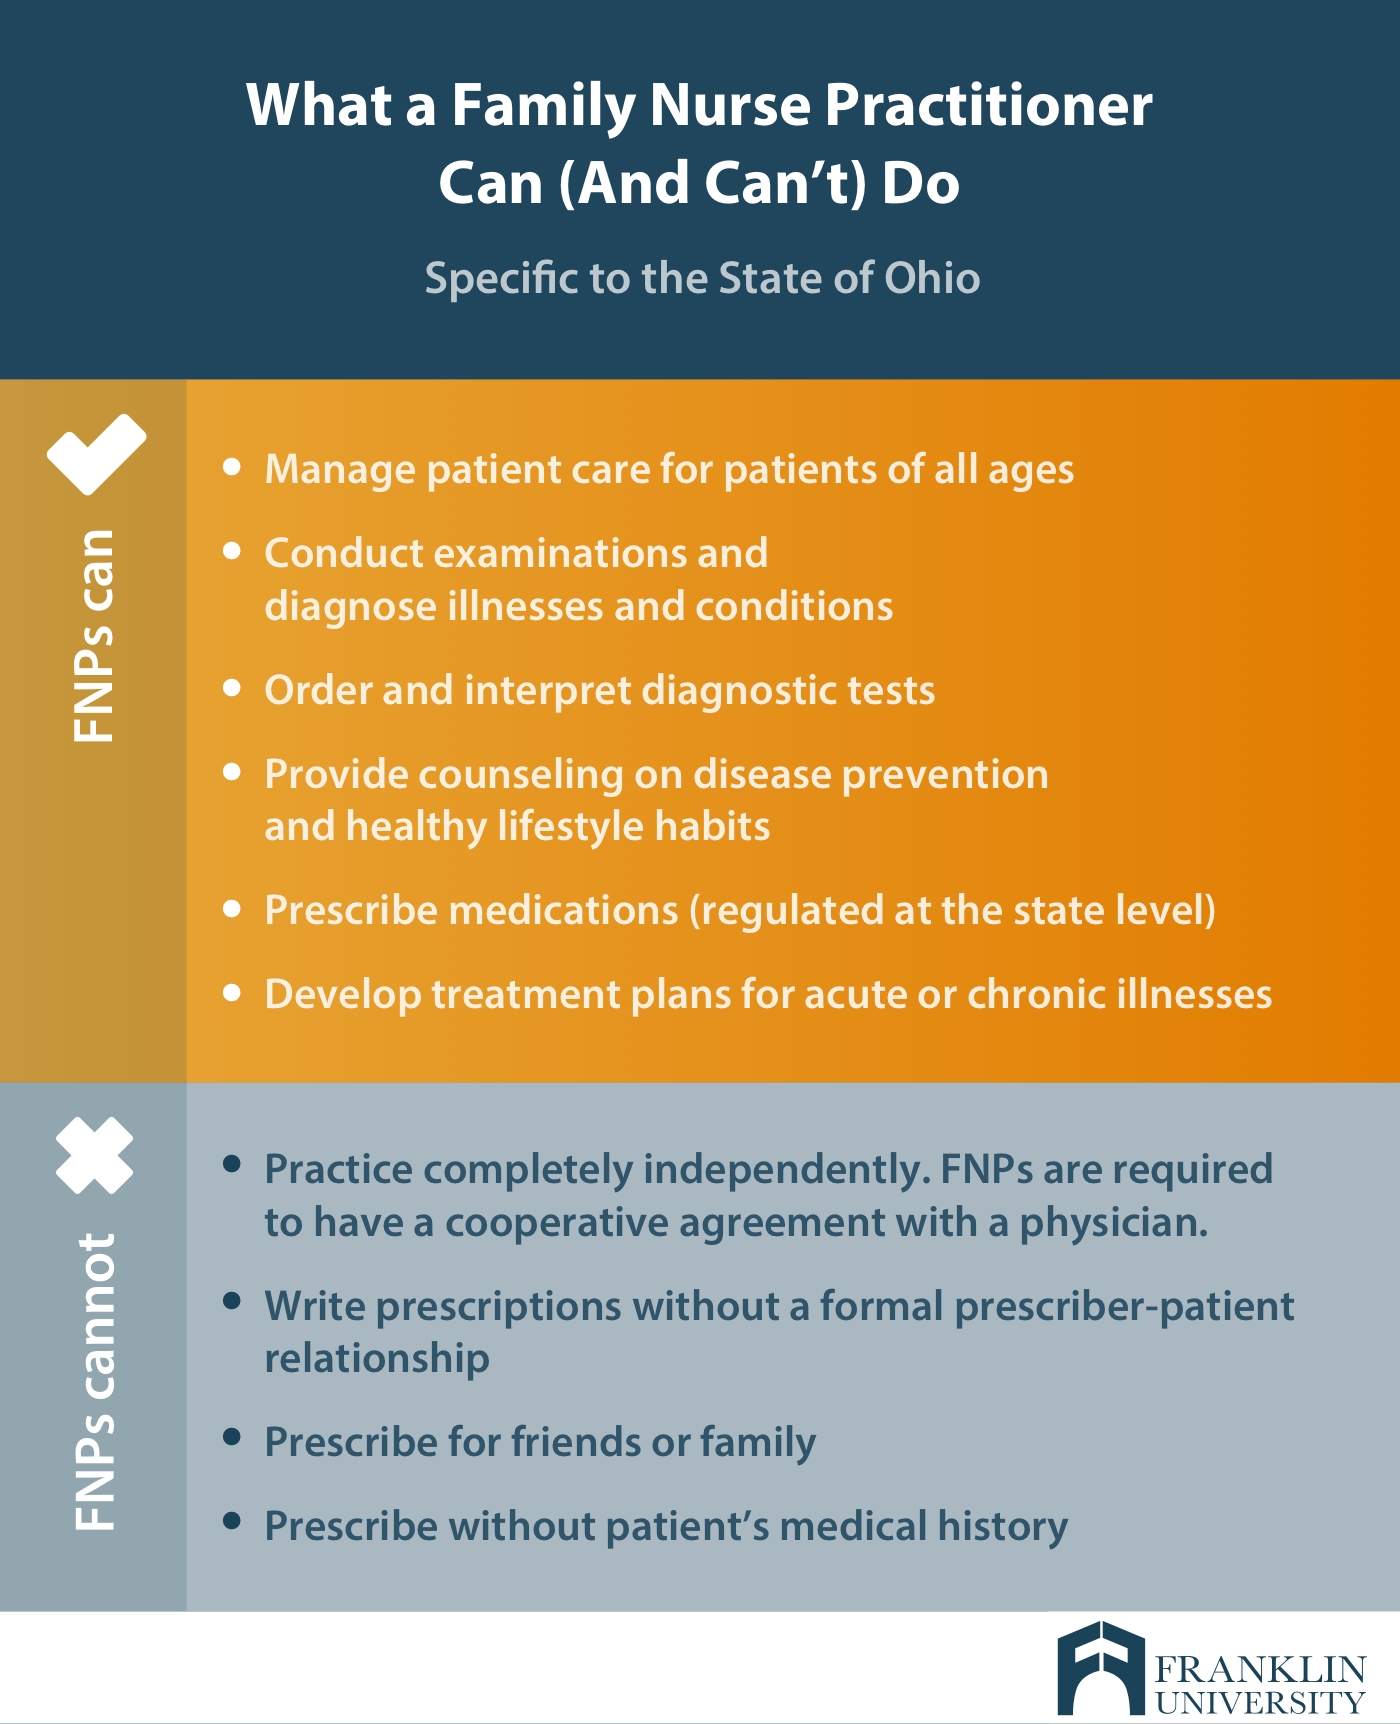 graphic describes what a family nurse practitioner can and can't do